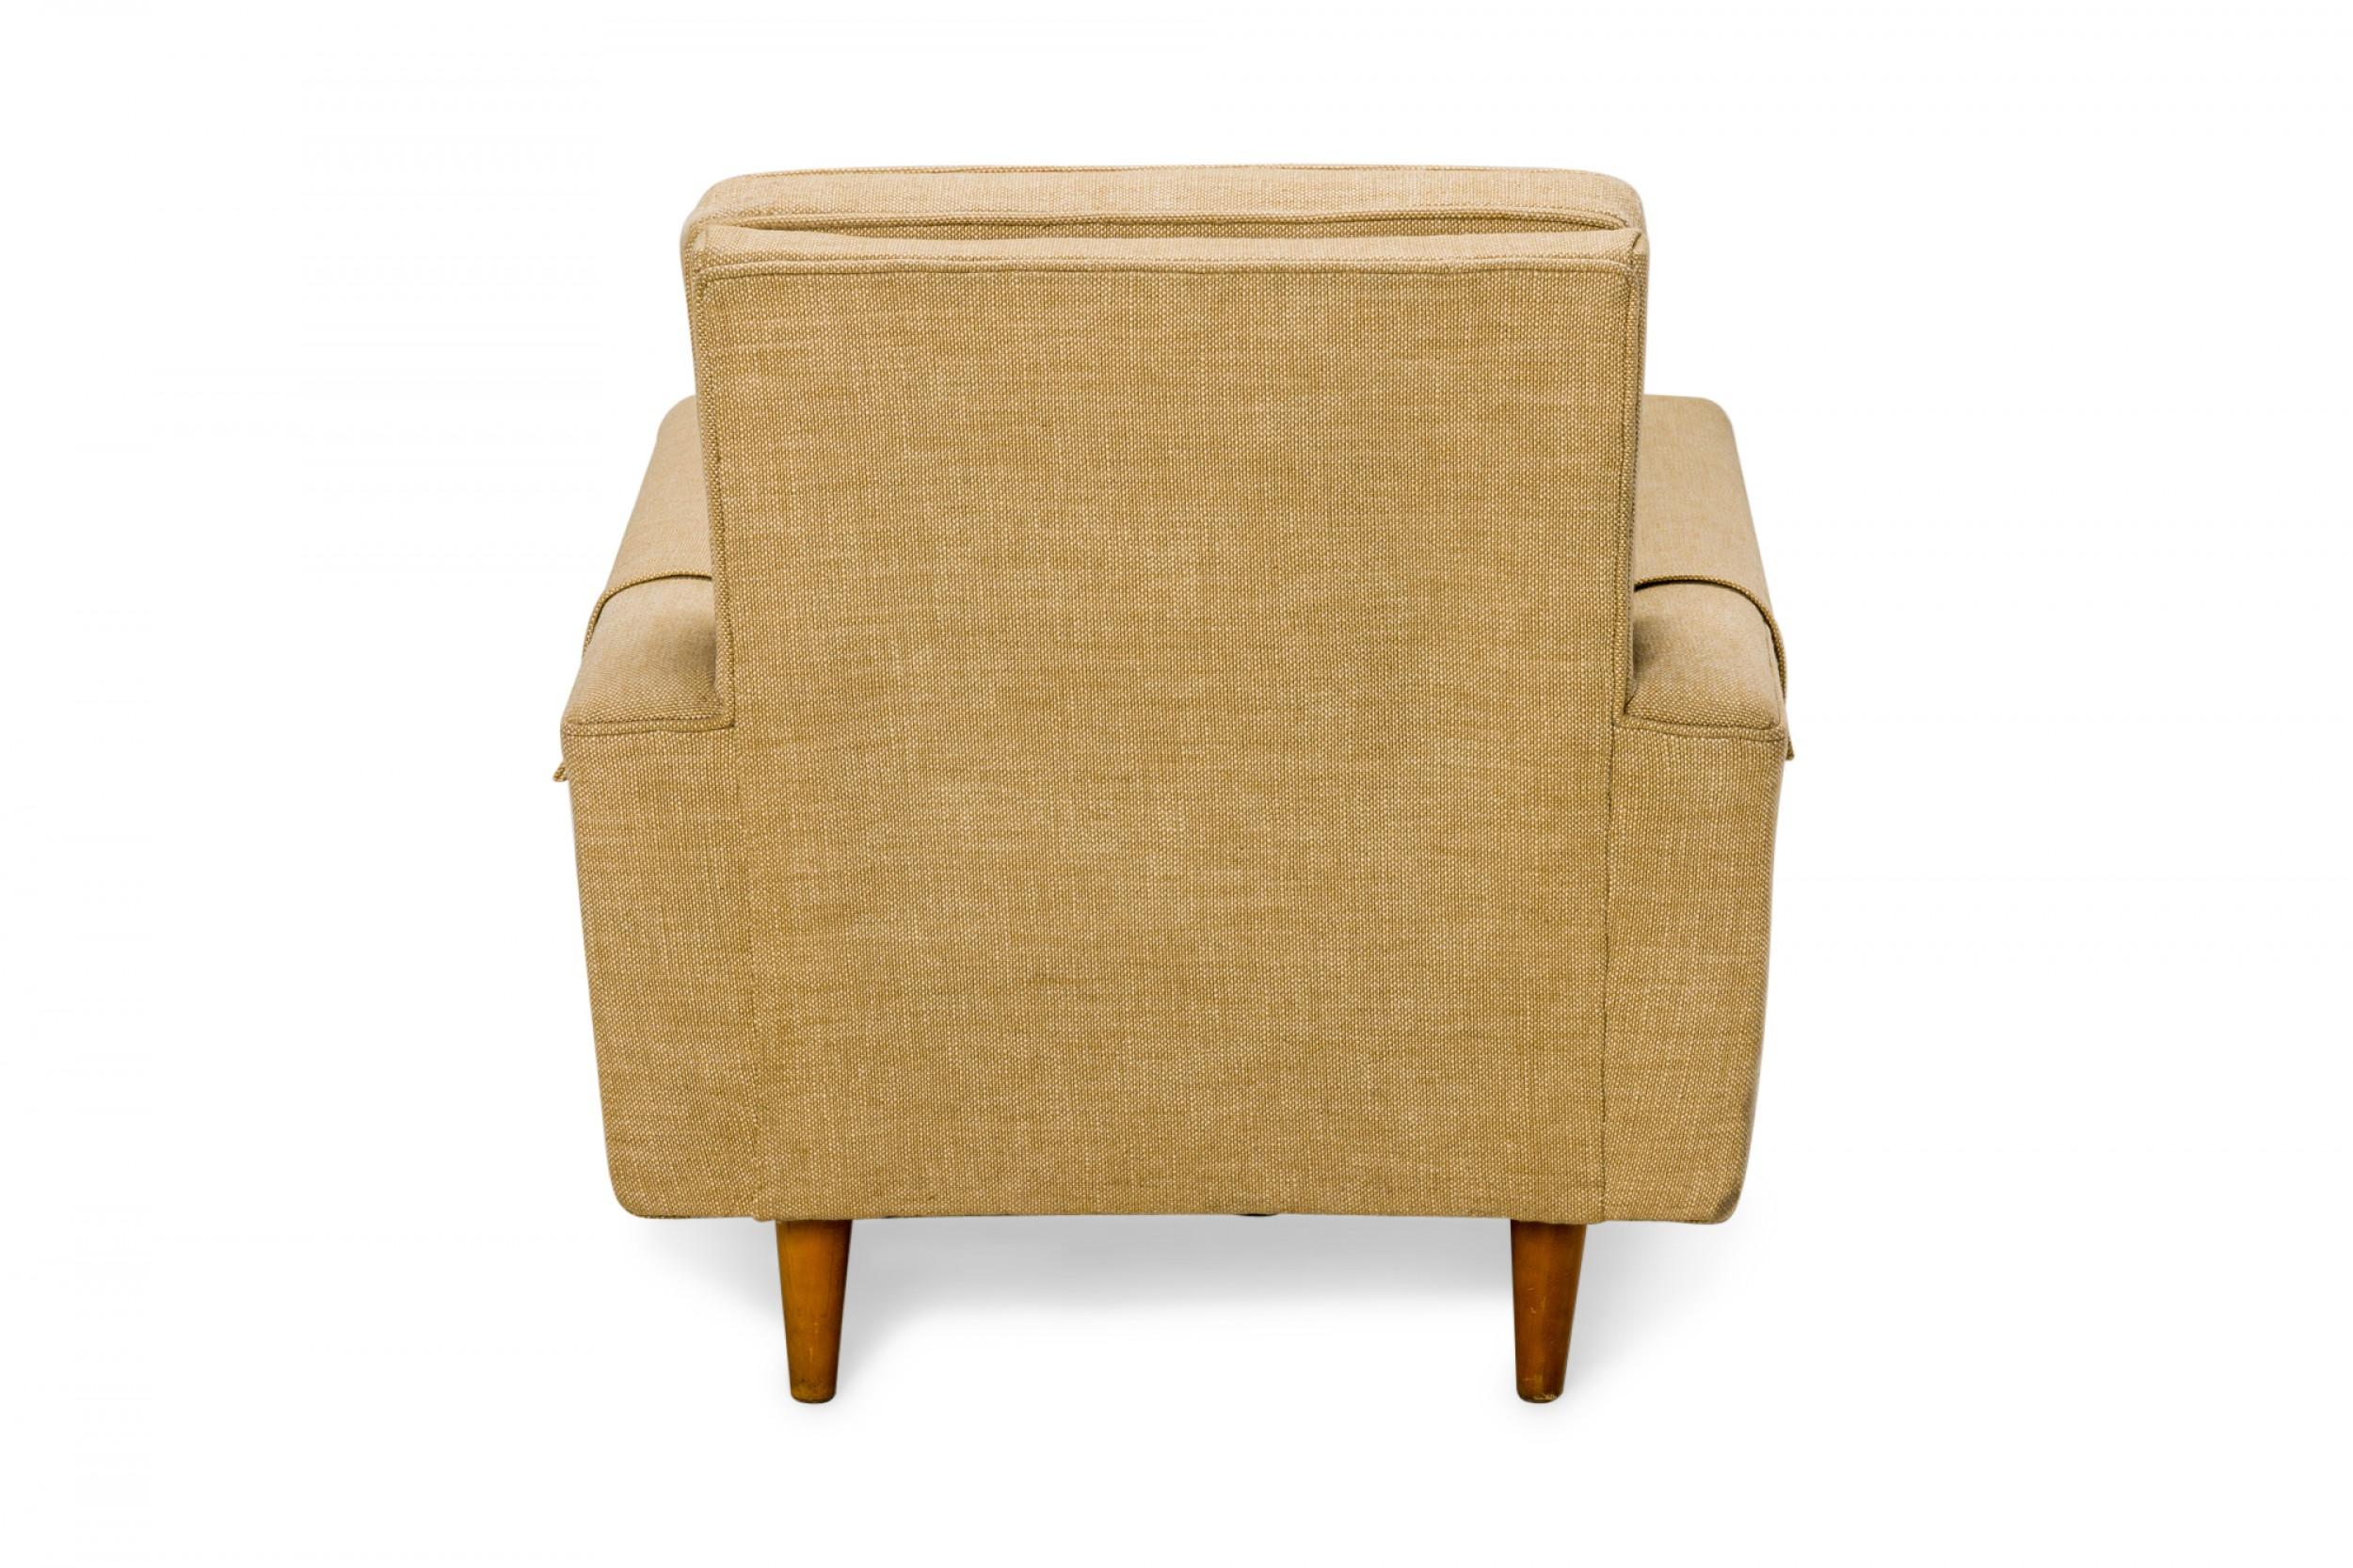 American Florence Knoll for Knoll International Beige Fabric Upholstered Lounge Armchair For Sale